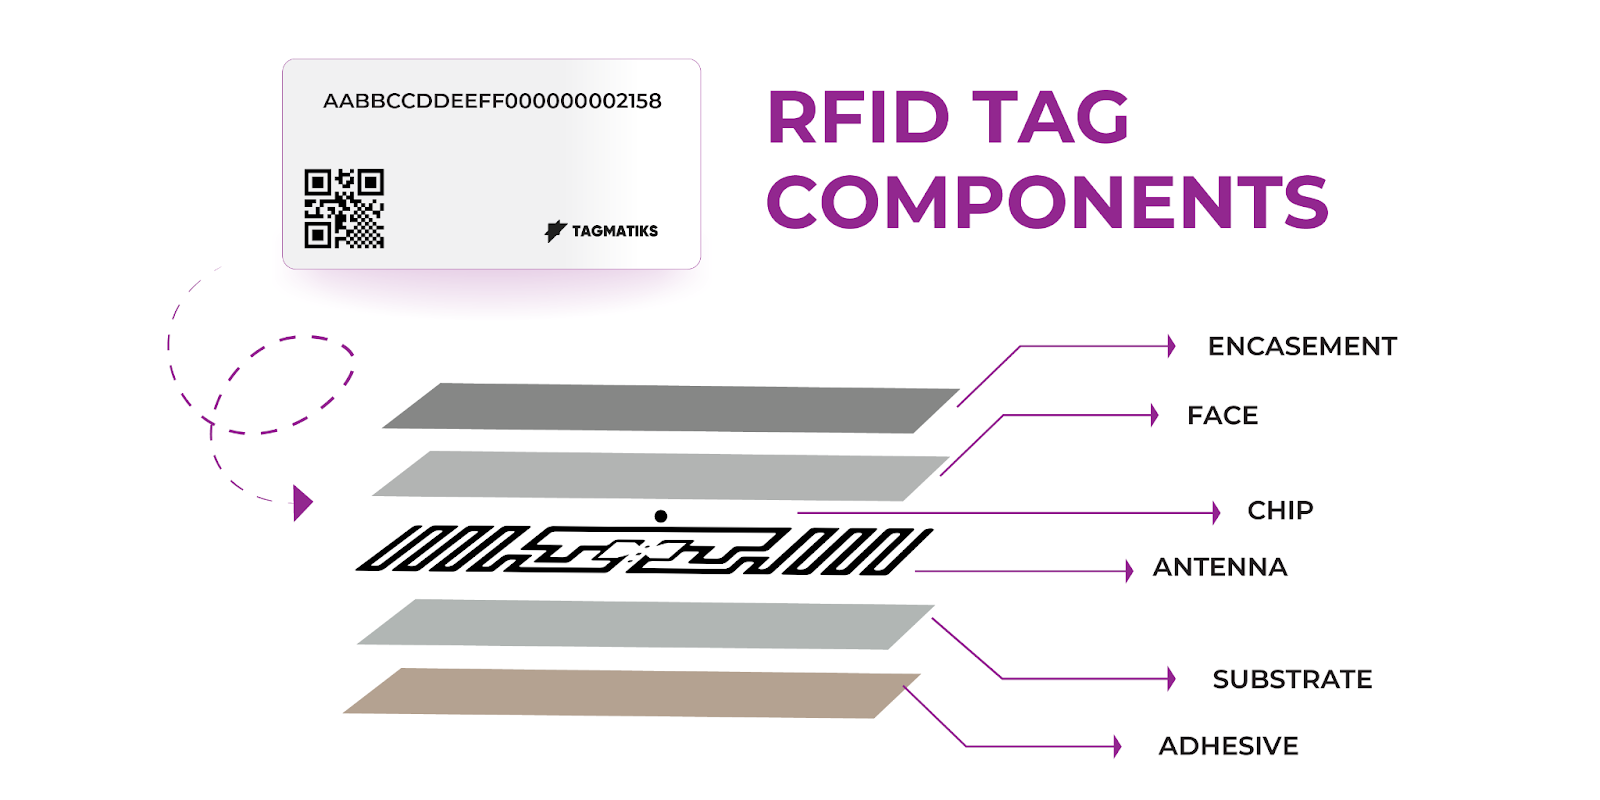 Components and Functionality of RFID Tags